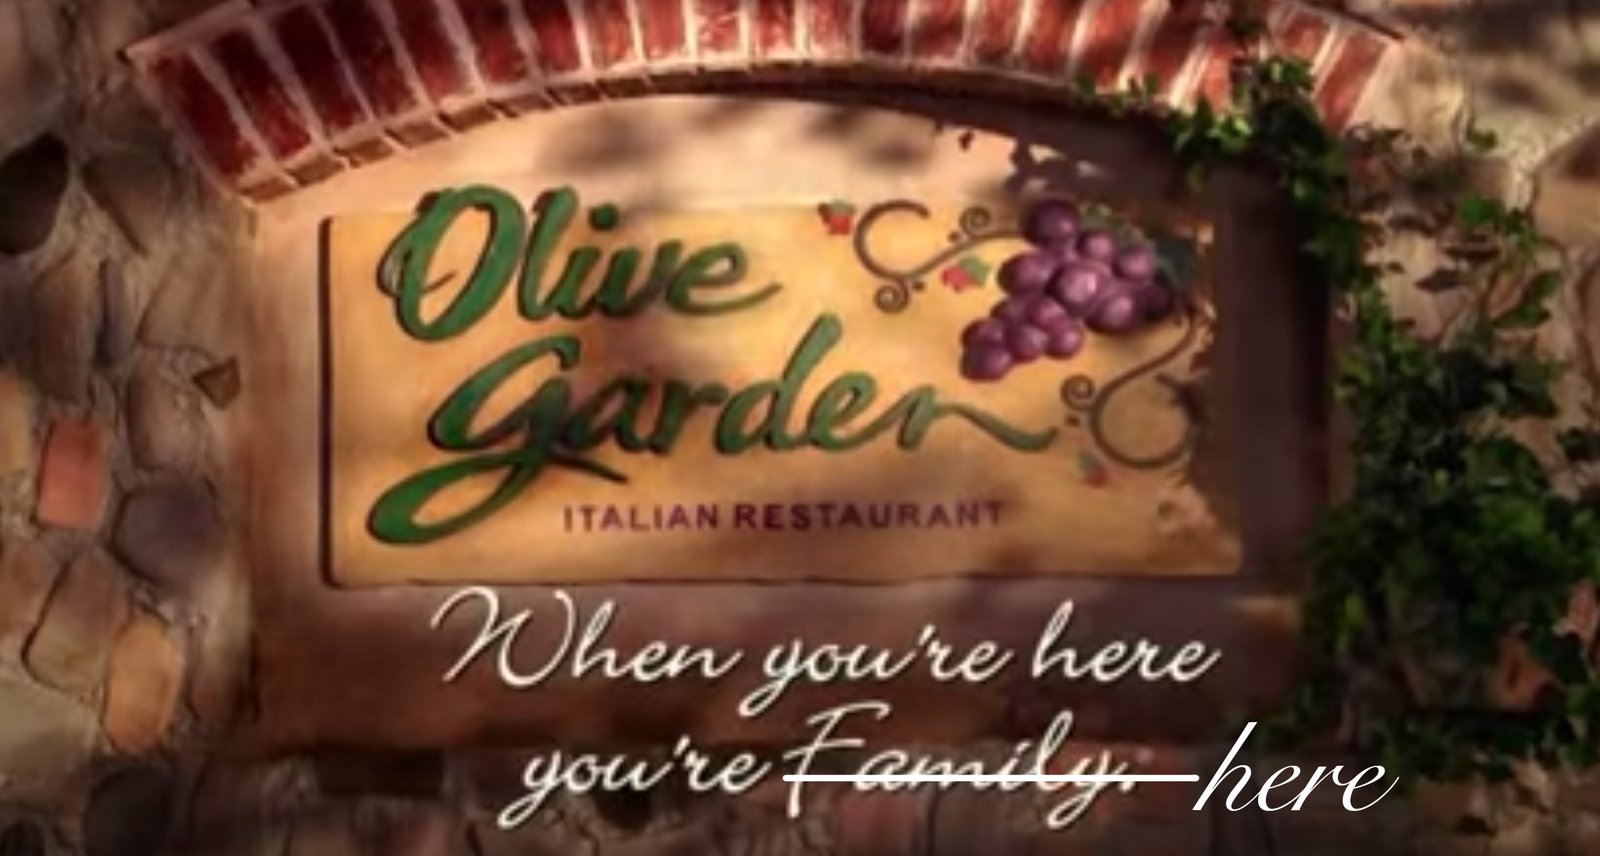 honest slogans  - olive garden when you re here - Olwe ces " Italian Restaurant When you're here you're Familyhere